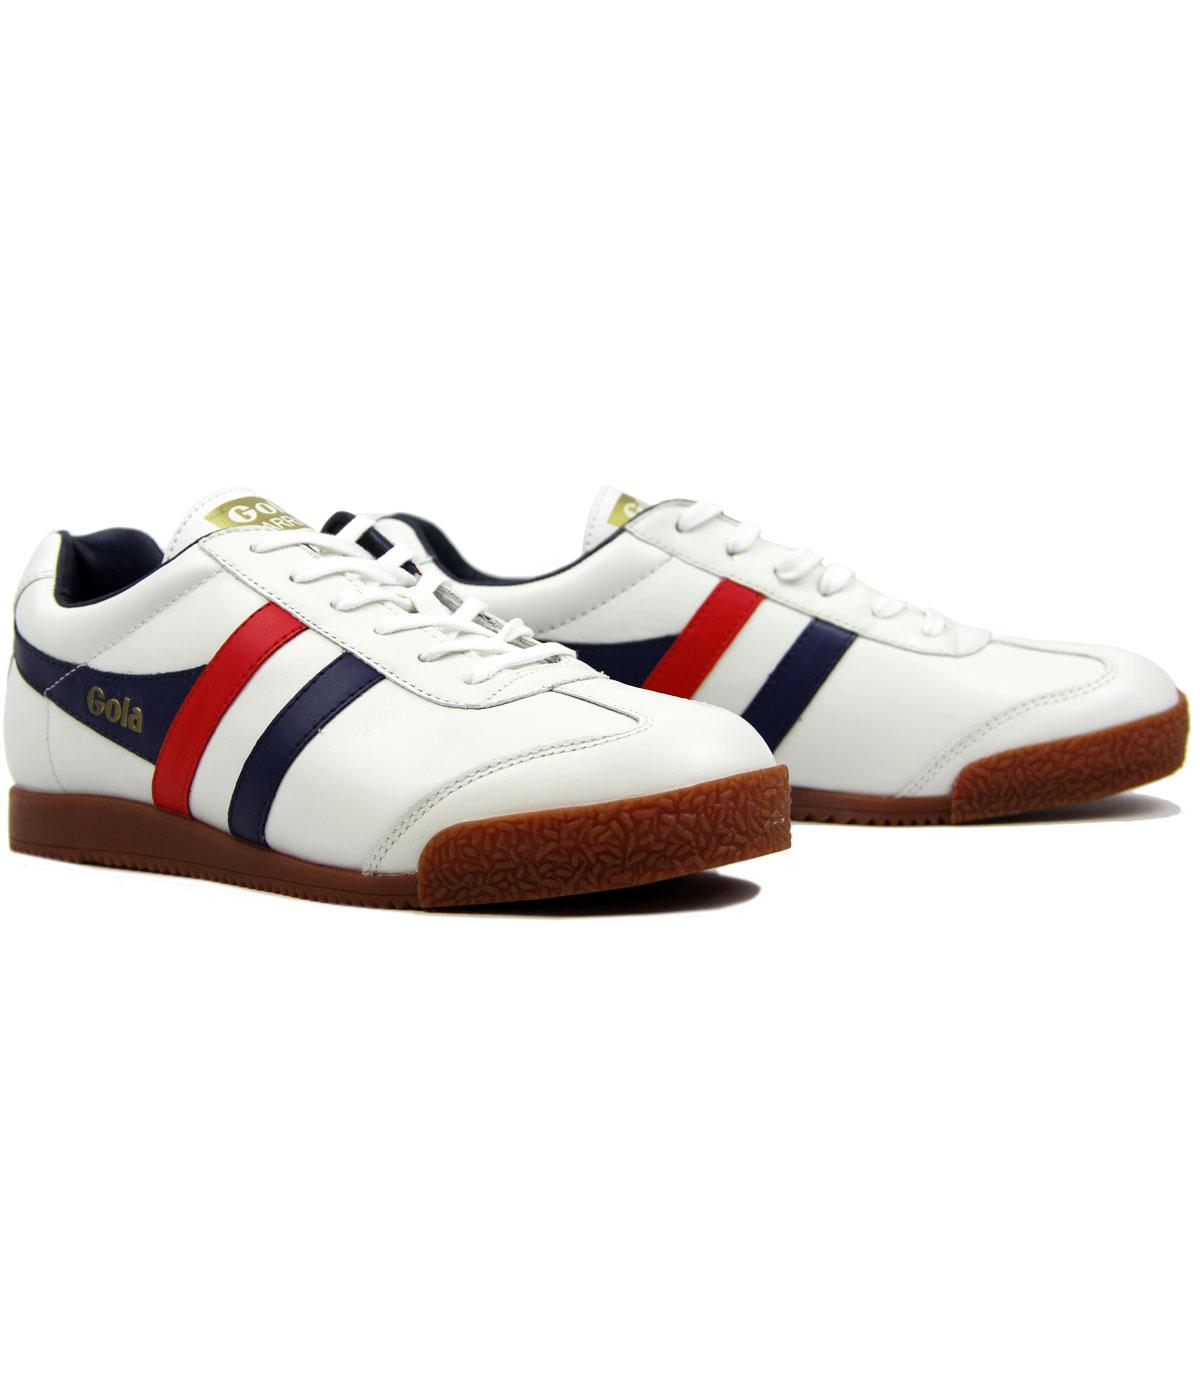 GOLA Harrier Retro 70s Indie Leather Trainers in White/Red/Navy